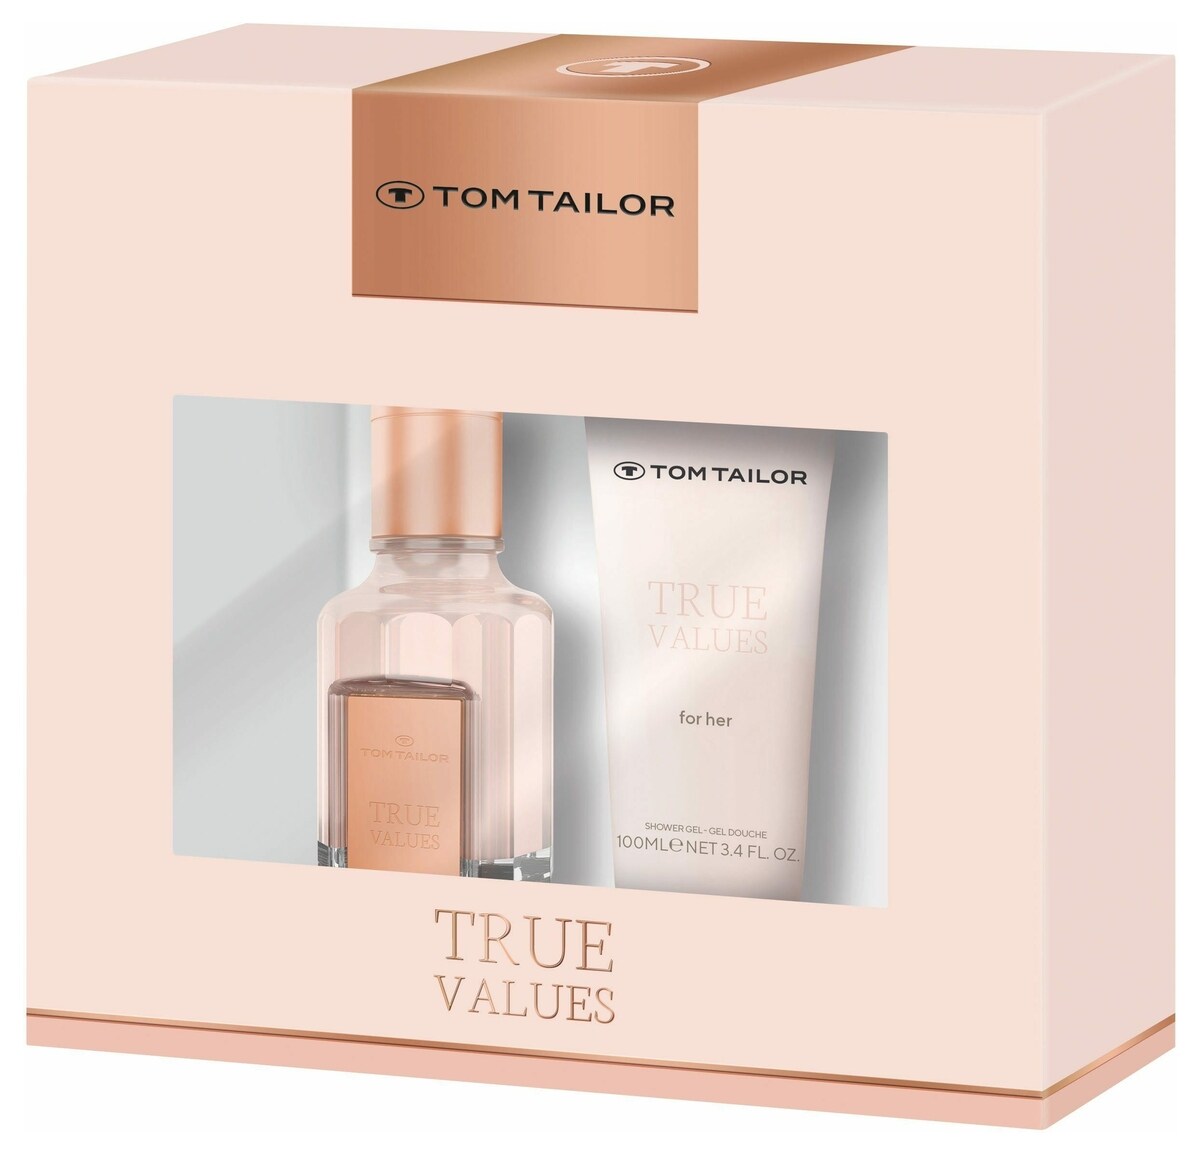 » True by Perfume Her Tom Reviews Tailor Facts & Values for